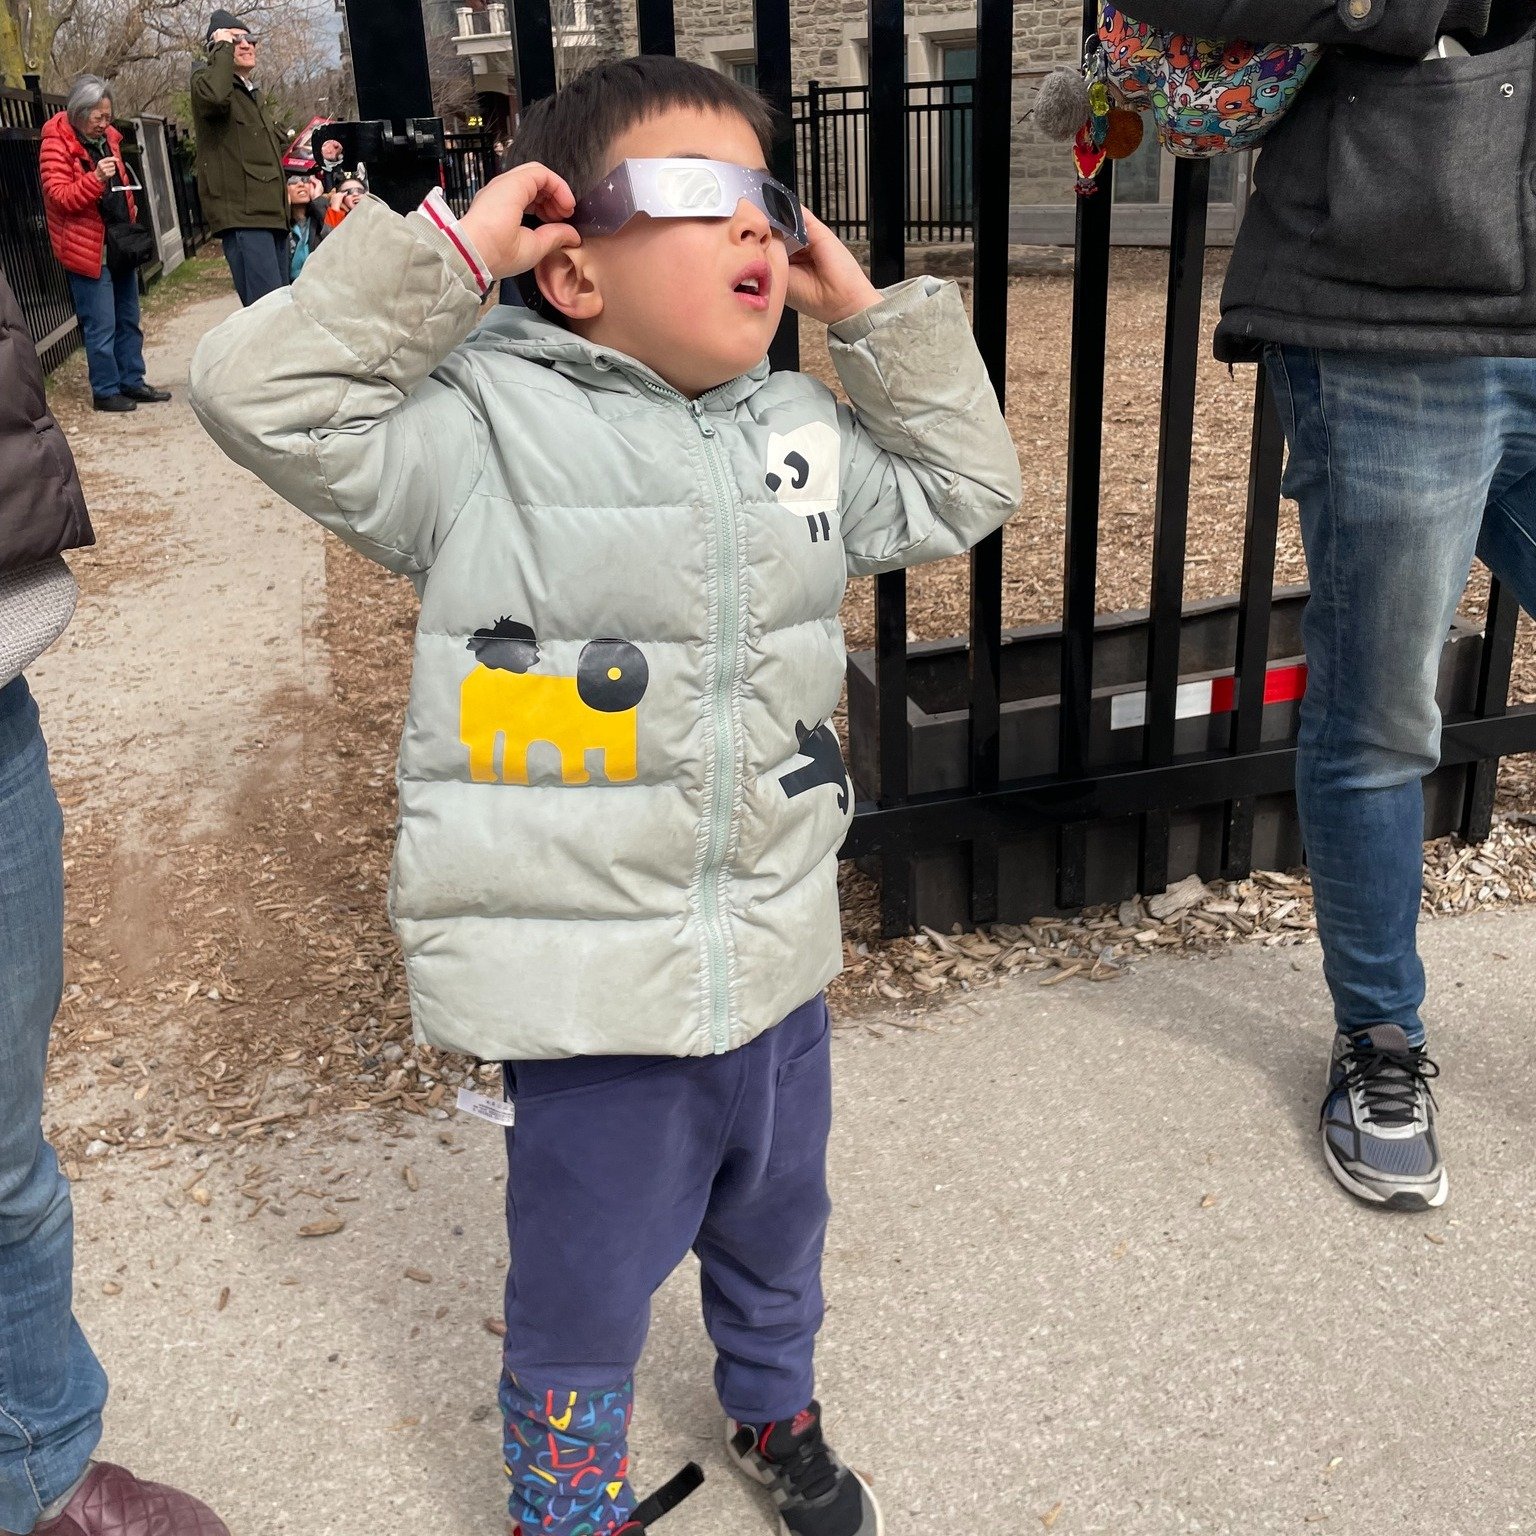 ☀️🌑Despite the cloudy skies, yesterday's eclipse viewing at our school was a memorable experience for everyone who attended. Students and staff gathered together, eager to witness this rare astronomical event. Although we couldn't see the eclipse as